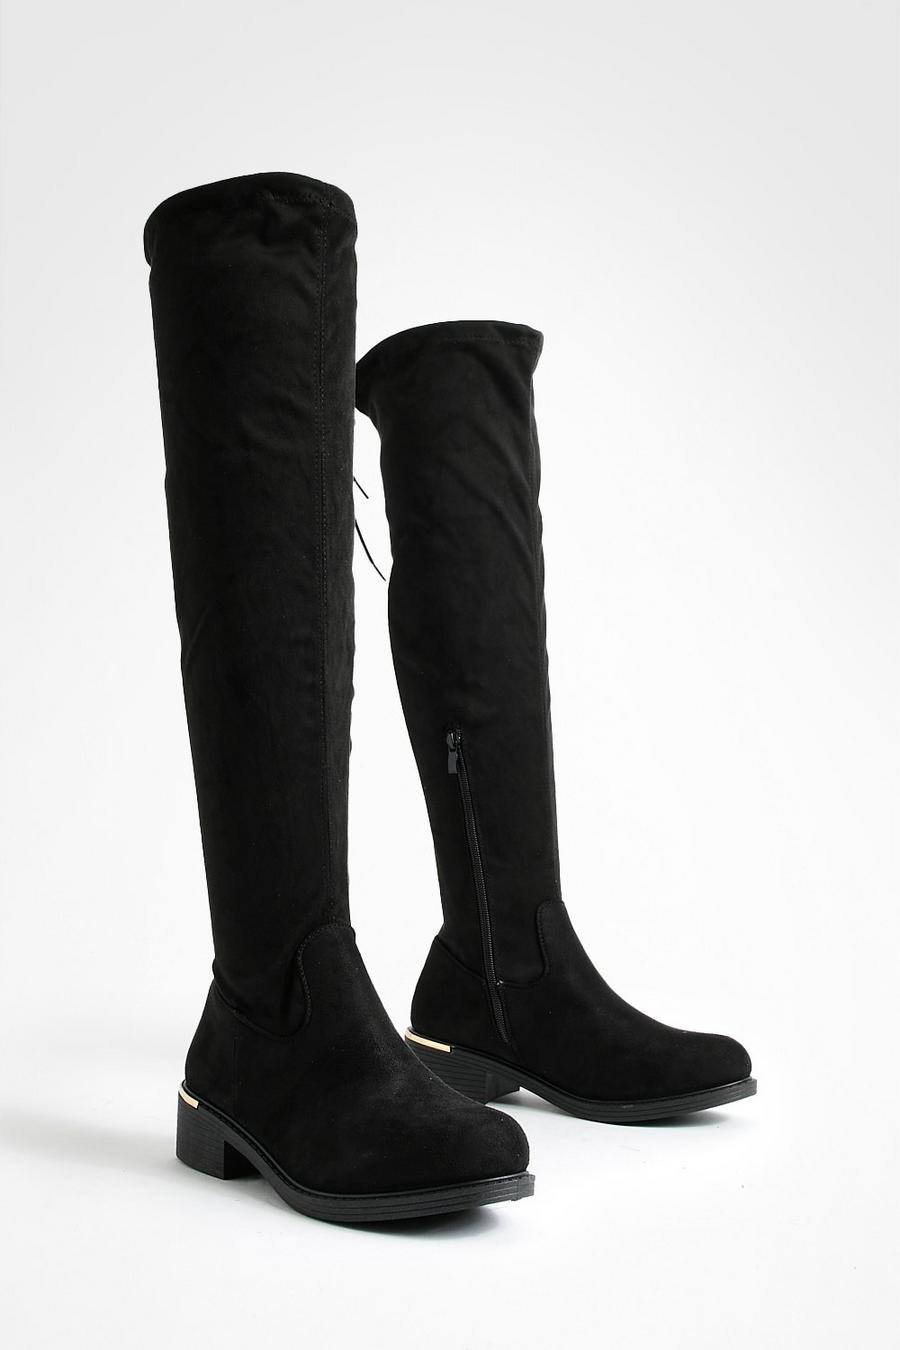 Black Metal Heel Detail Stretch Over The Knee Boots